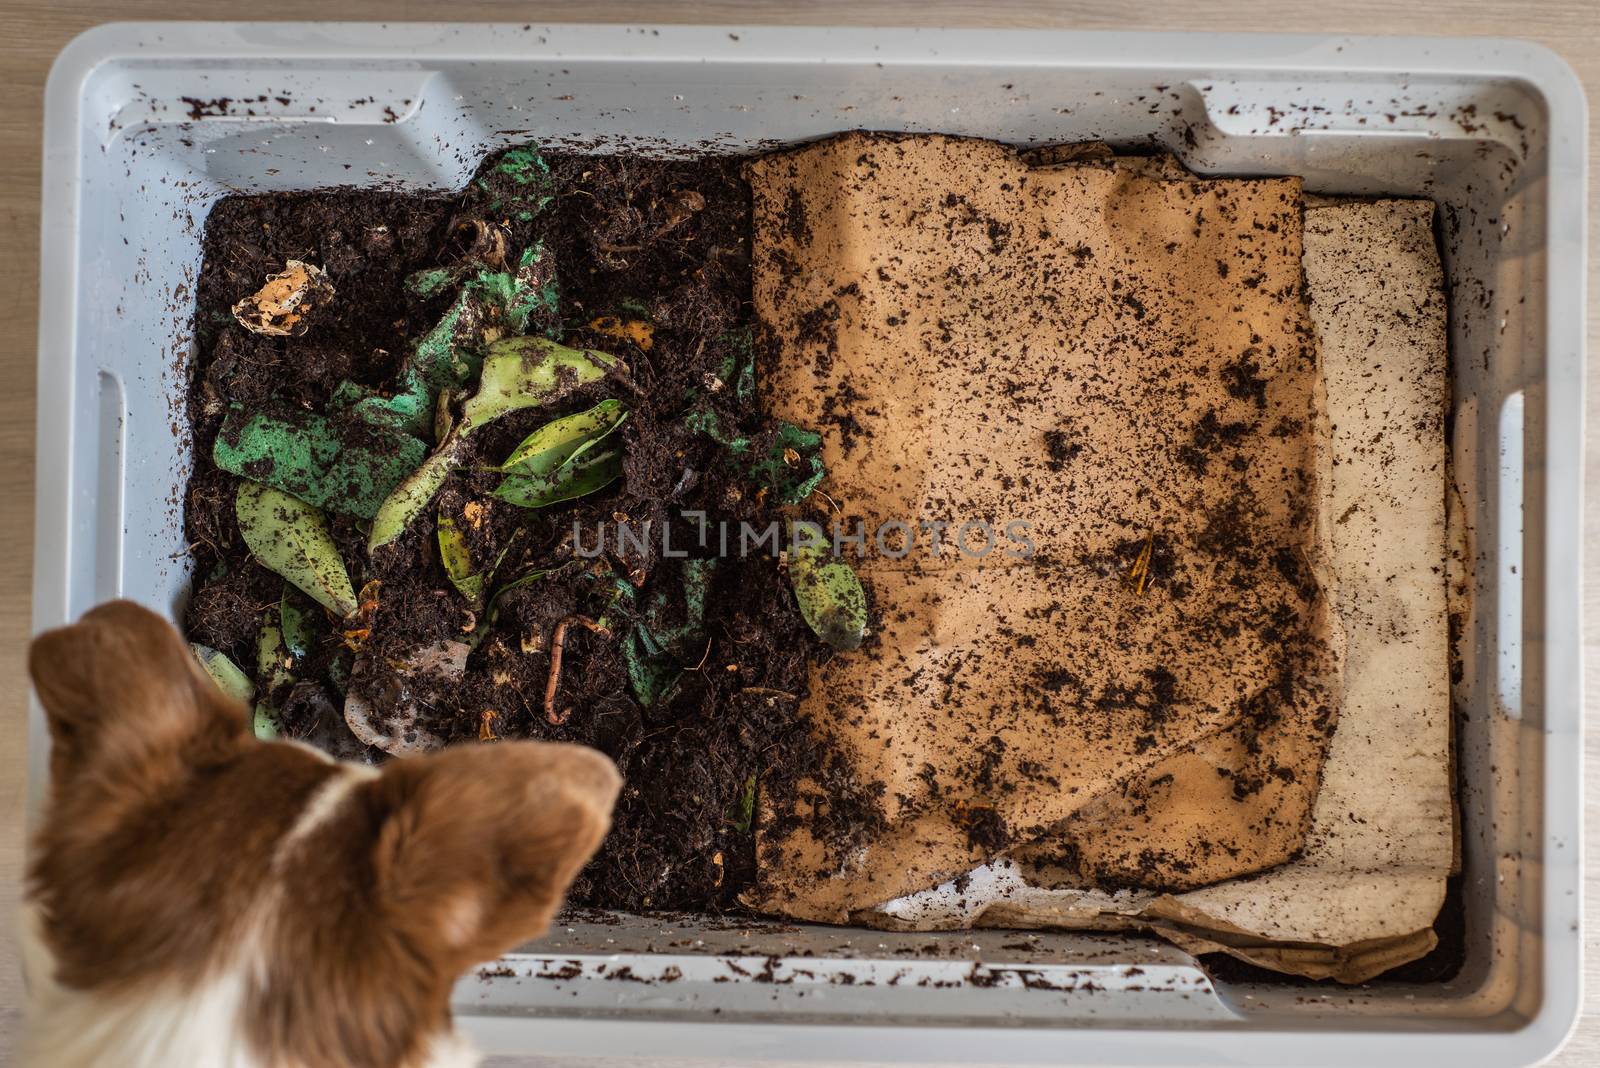 Top view of a dog looking down into a DIY worm farm composting bin by Pendleton